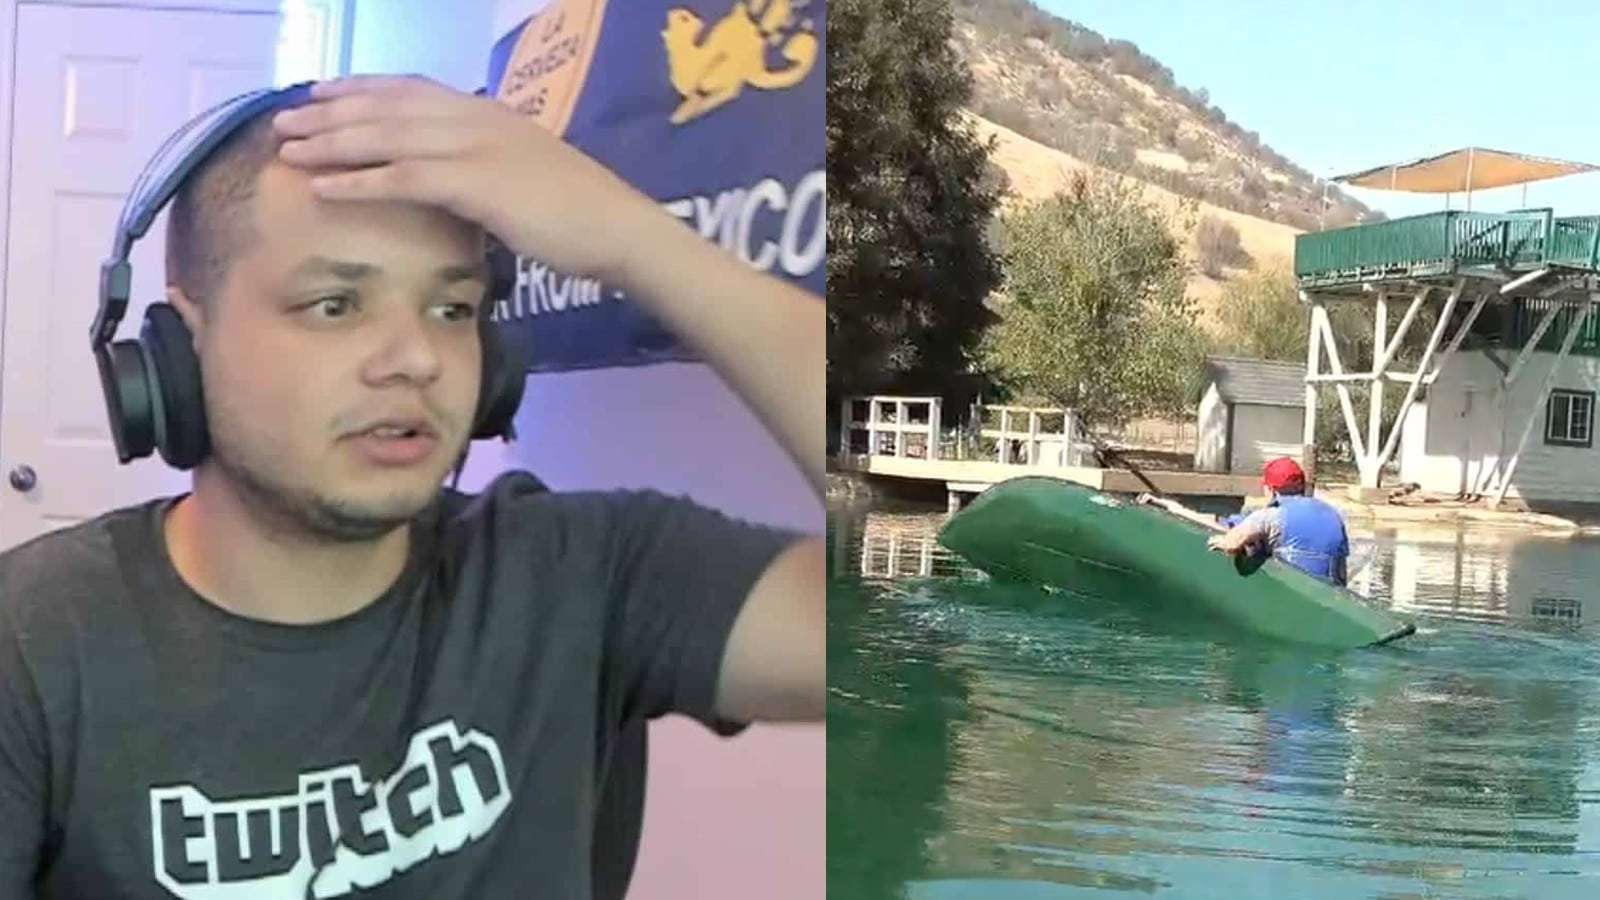 Erobb putting his hand to head in shock and his karak capsizing live on stream